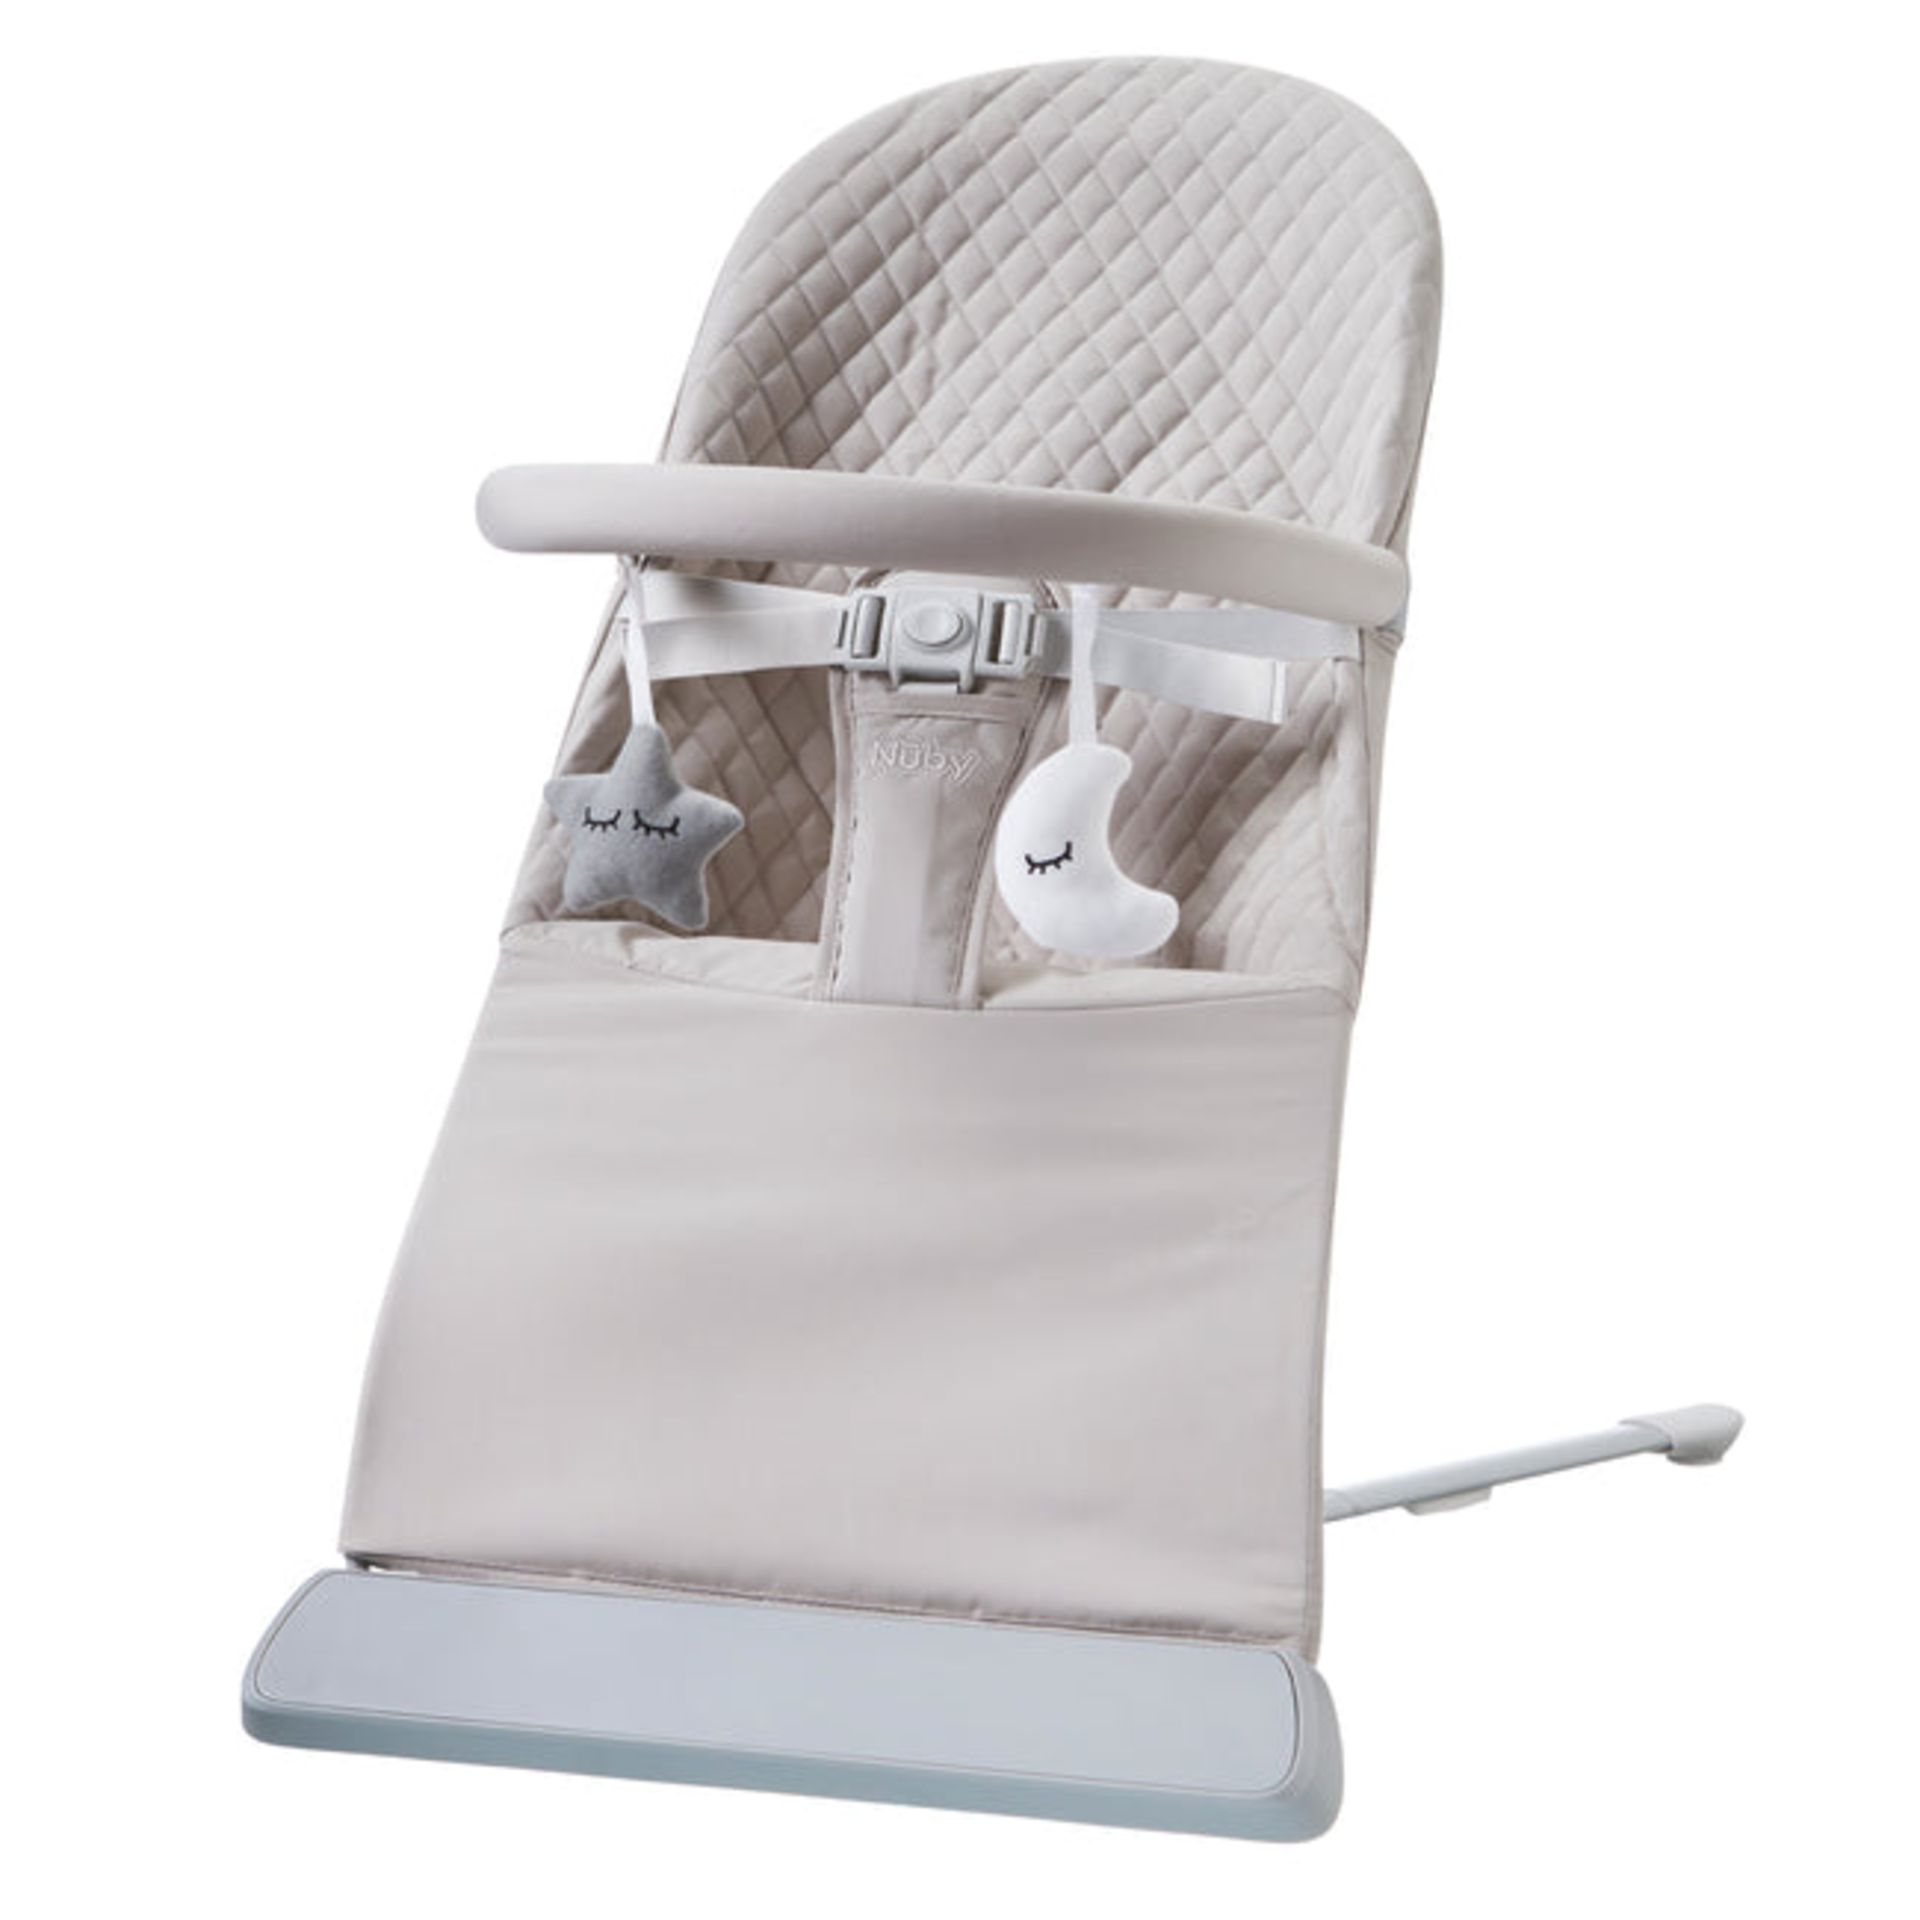 NUBY MUSICAL MOVES BABY BOUNCER, Two reclining positions Nine relaxing rhythms Vibrating motion